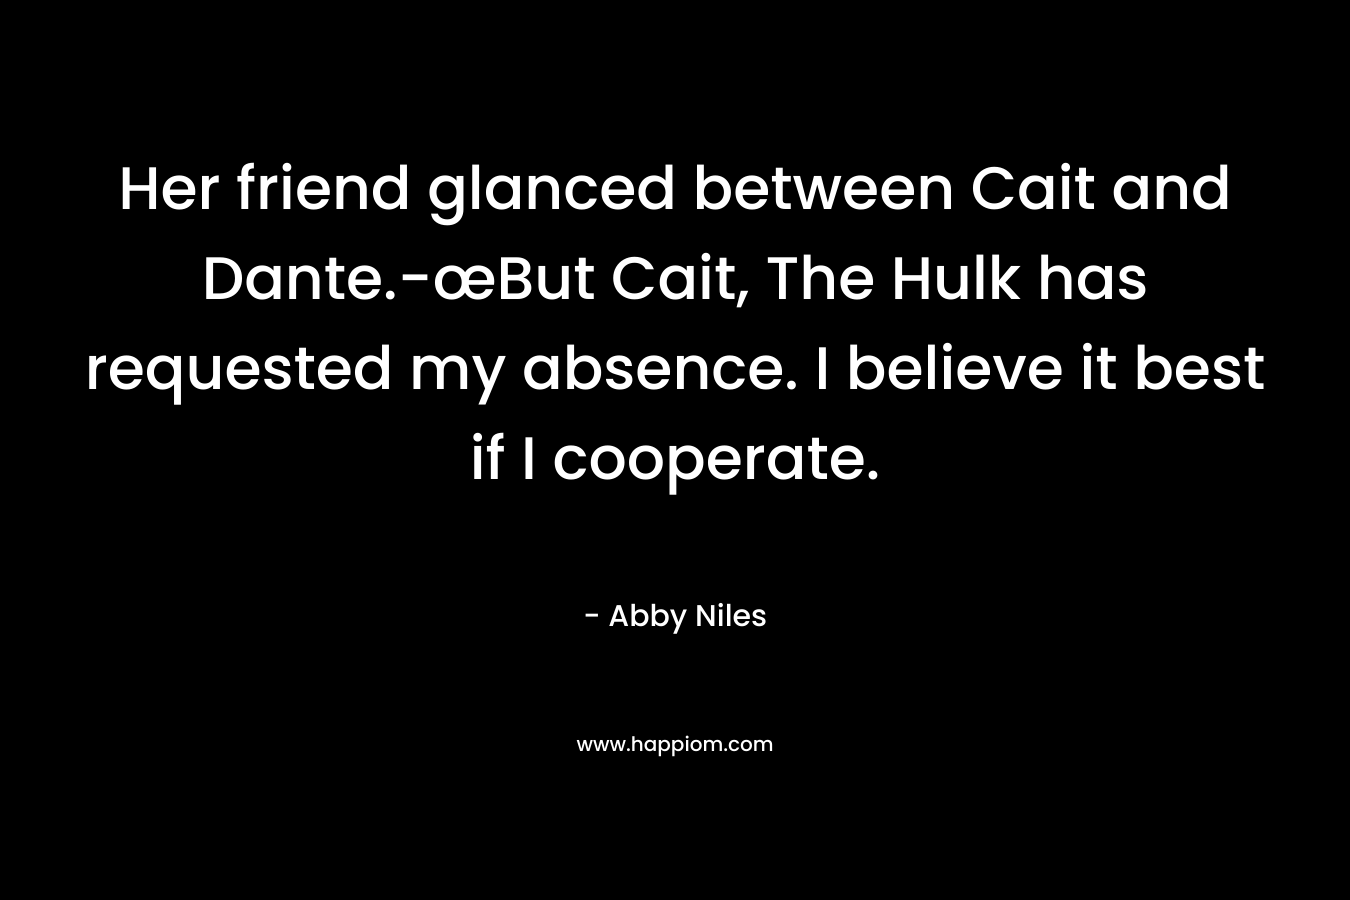 Her friend glanced between Cait and Dante.-œBut Cait, The Hulk has requested my absence. I believe it best if I cooperate. – Abby Niles